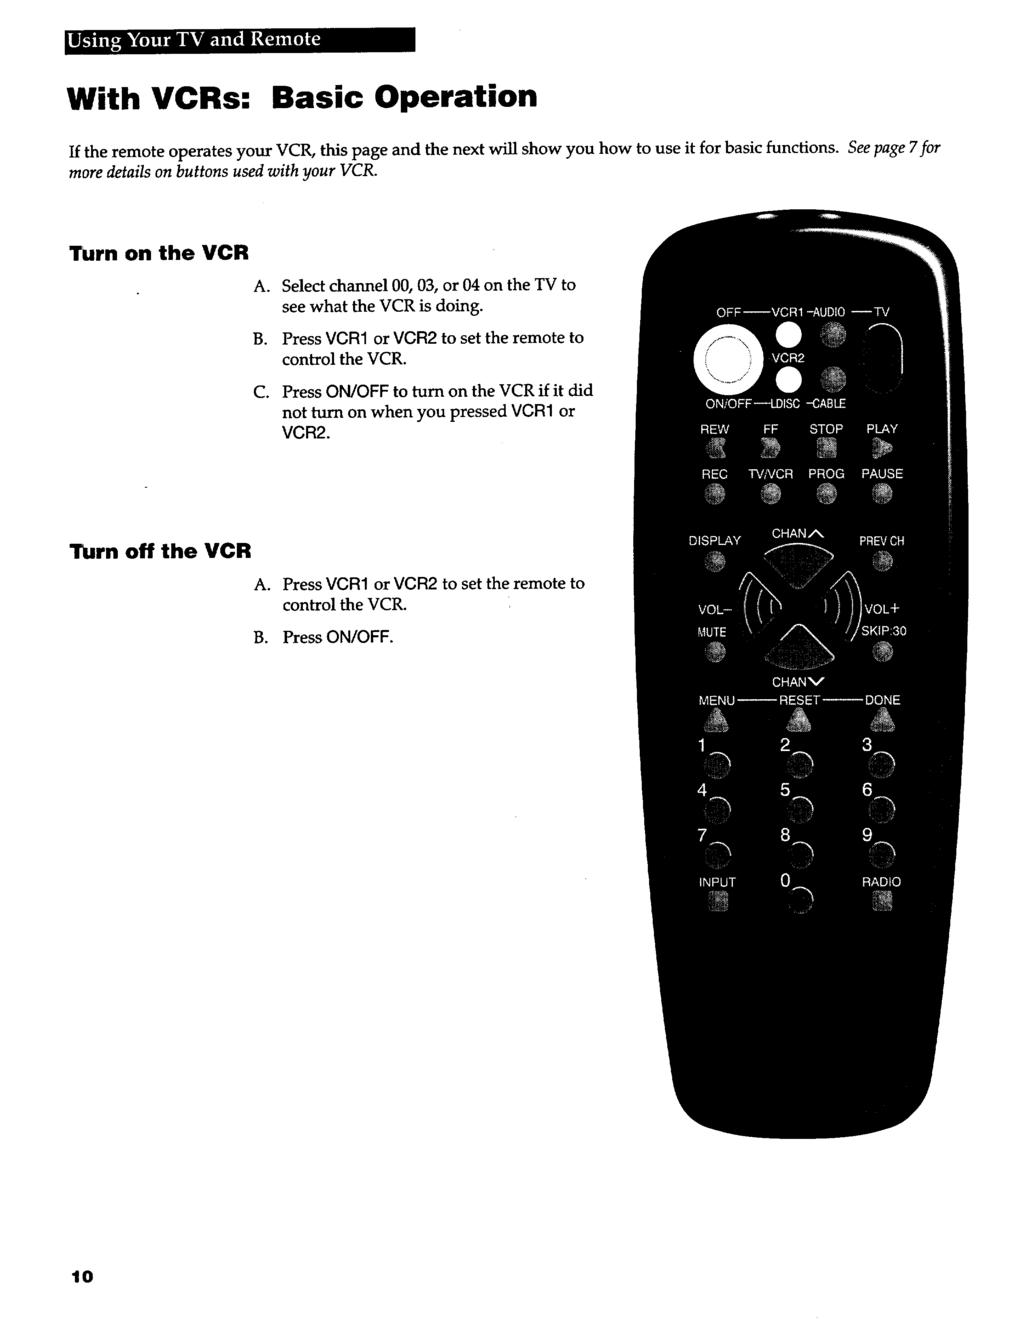 j b'l;_ i_d _'fmj_r With VCRs: Basic Operation If the remote operates your VCR, this page and the next will show you how to use it for basic functions.